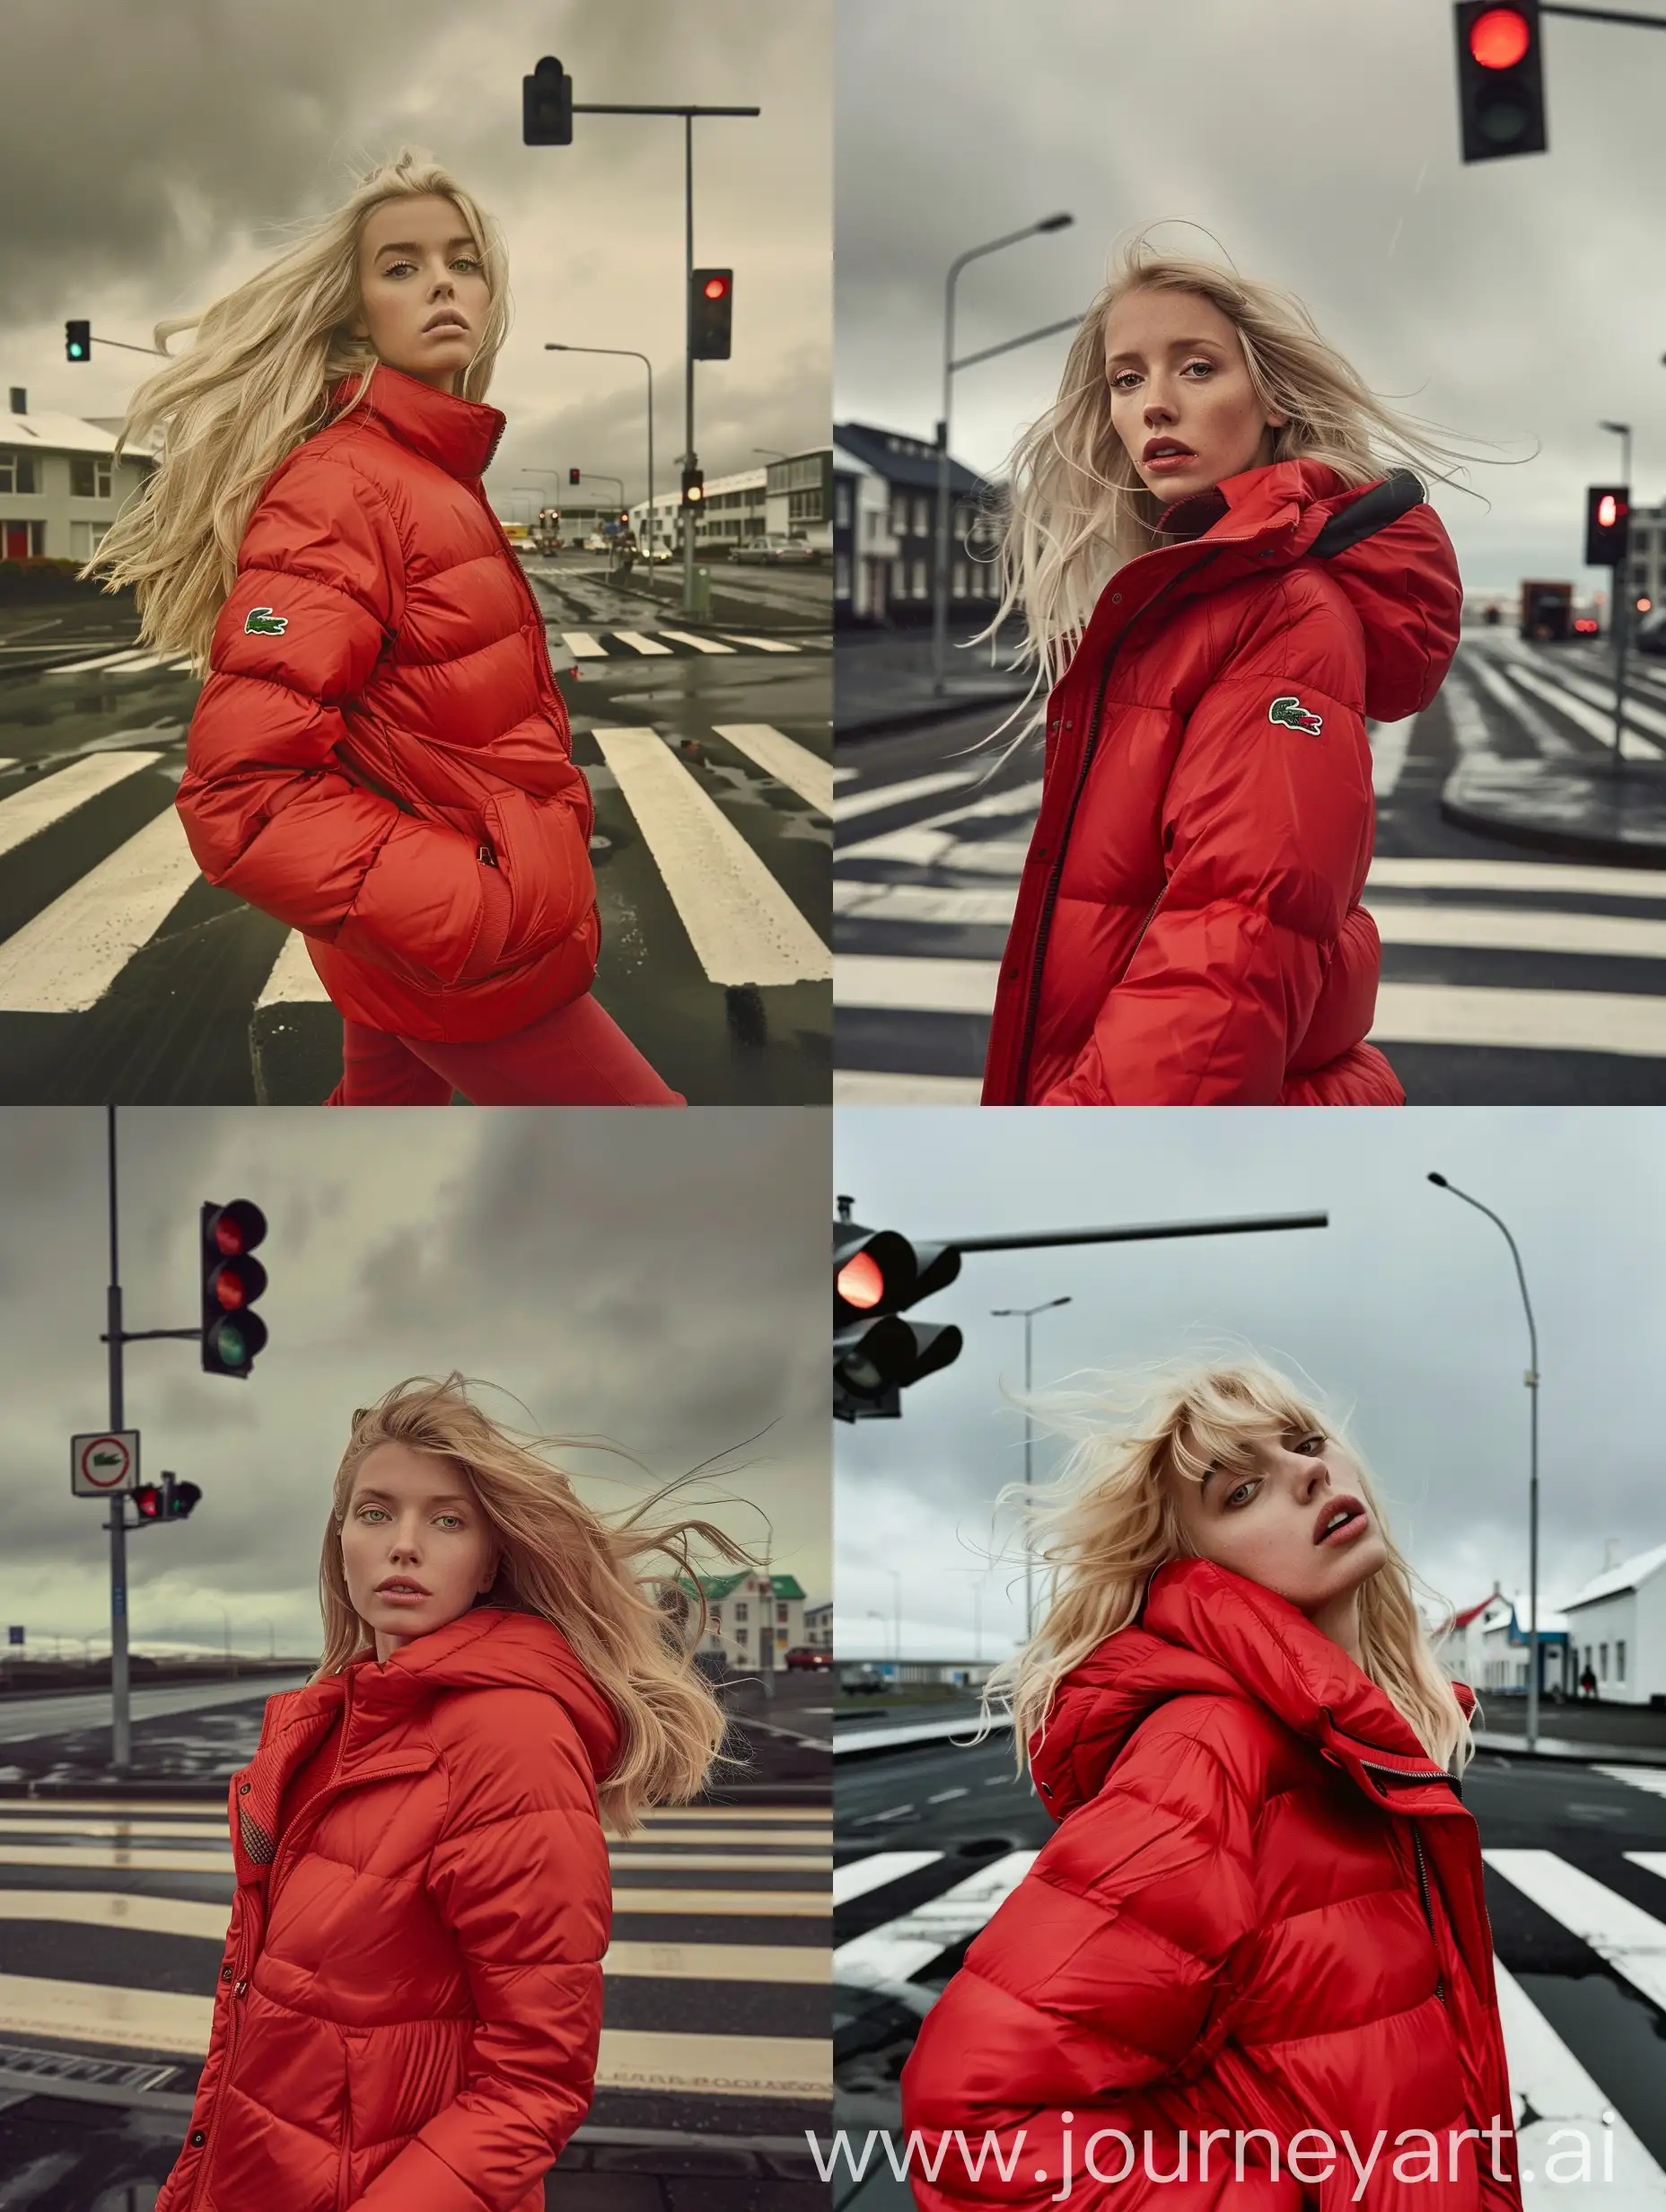 A stunning, hyper-realistic photograph of an Icelandic woman with blonde hair, dressed in a striking red puffer jacket. She exudes confidence as she struts across a Reykjavik crosswalk, with its iconic stripes and traffic lights, on a cloudy day. The urban environment is surreal, with a hint of otherworldly charm, seamlessly blending Lacoste fashion with the unique atmosphere of the city streets